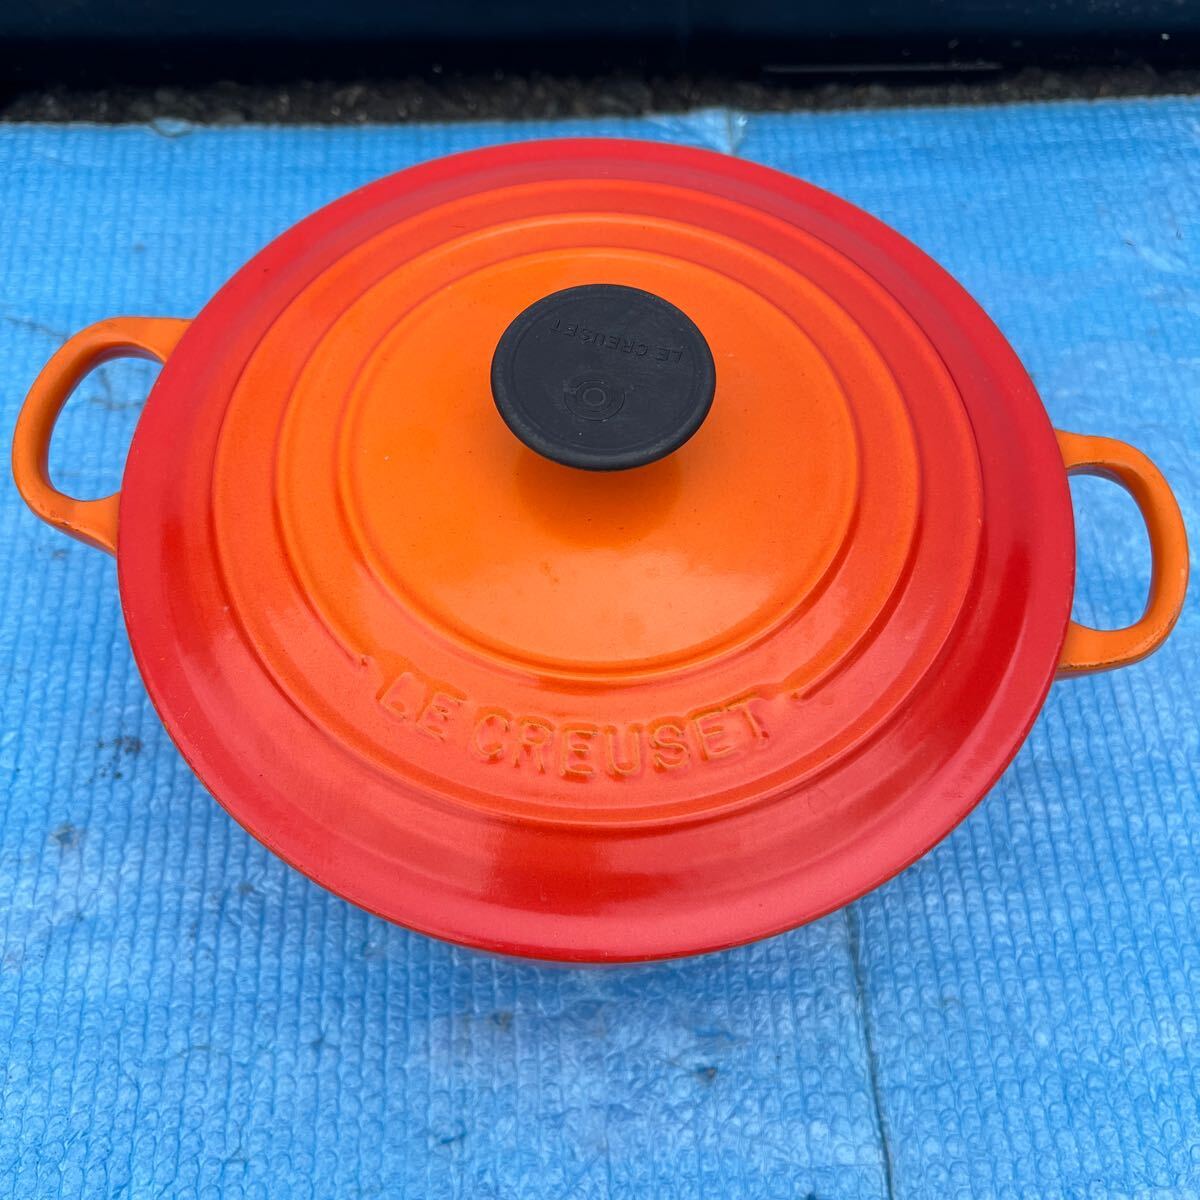 LE CREUSET 両手鍋 クルーゼ オレンジ ココット 20の画像1